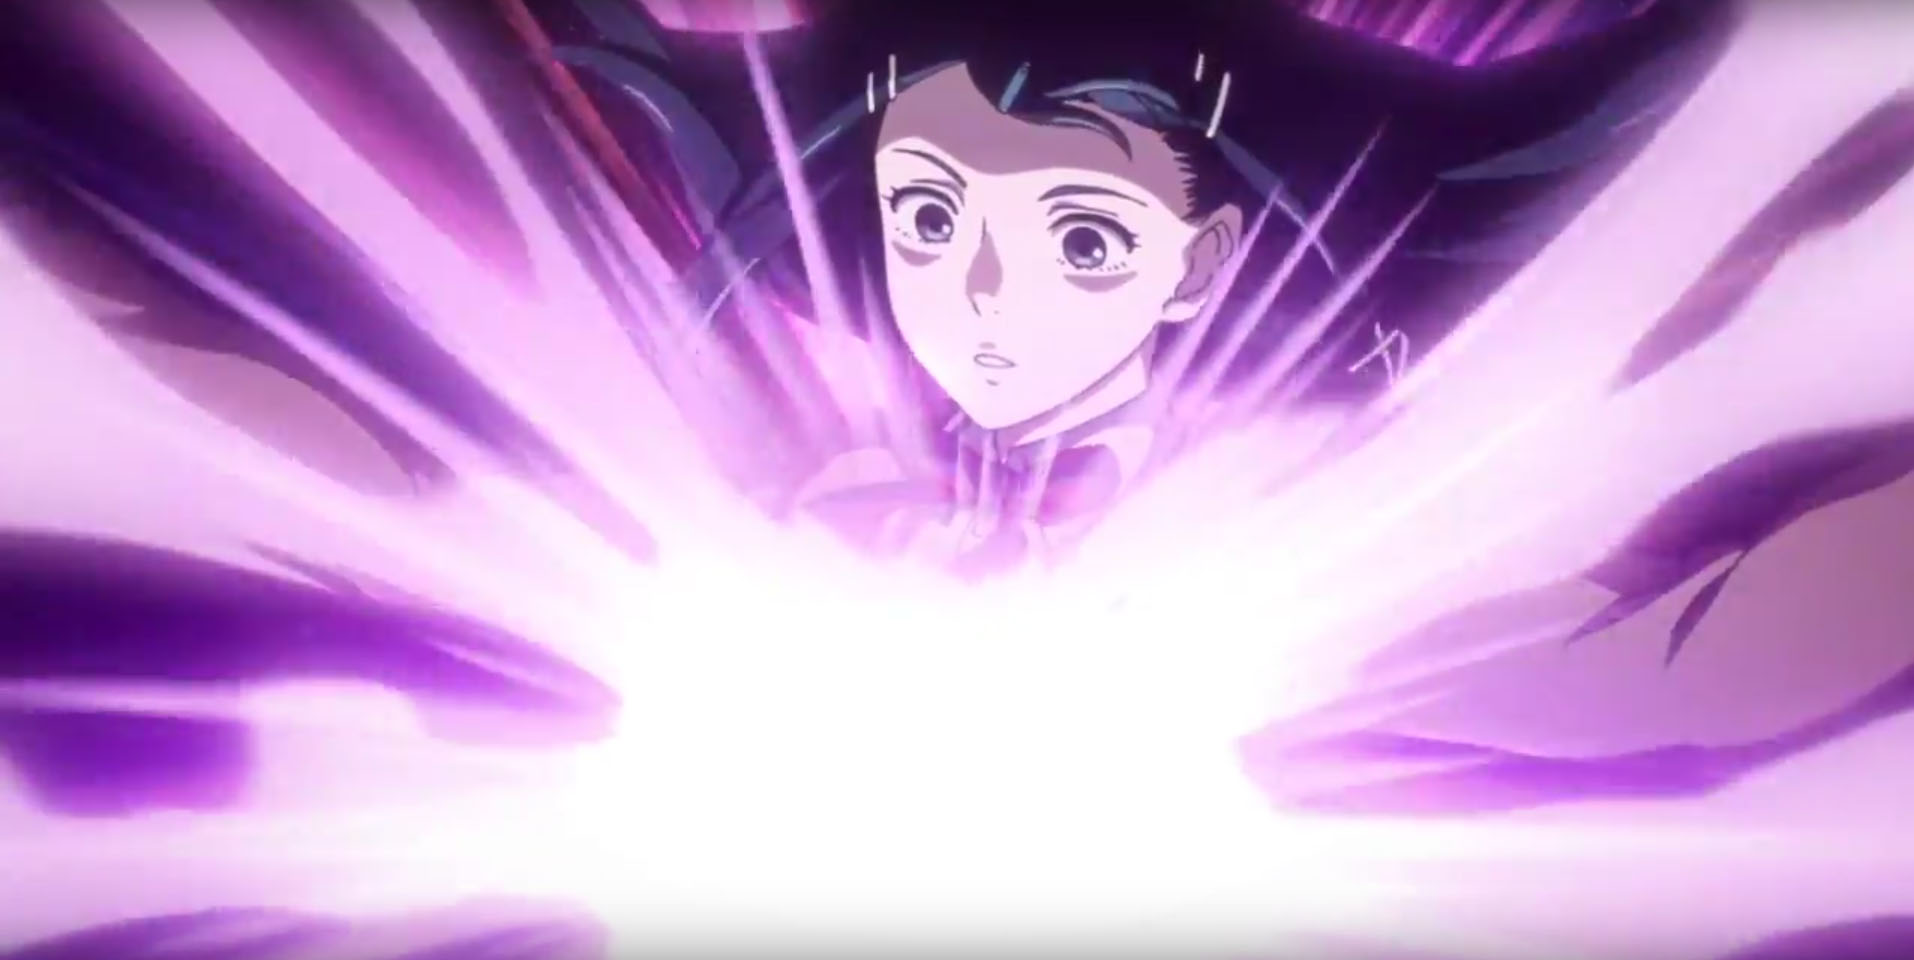 Two New Trailers For Shin Megami Tensei x Fire Emblem Now Live